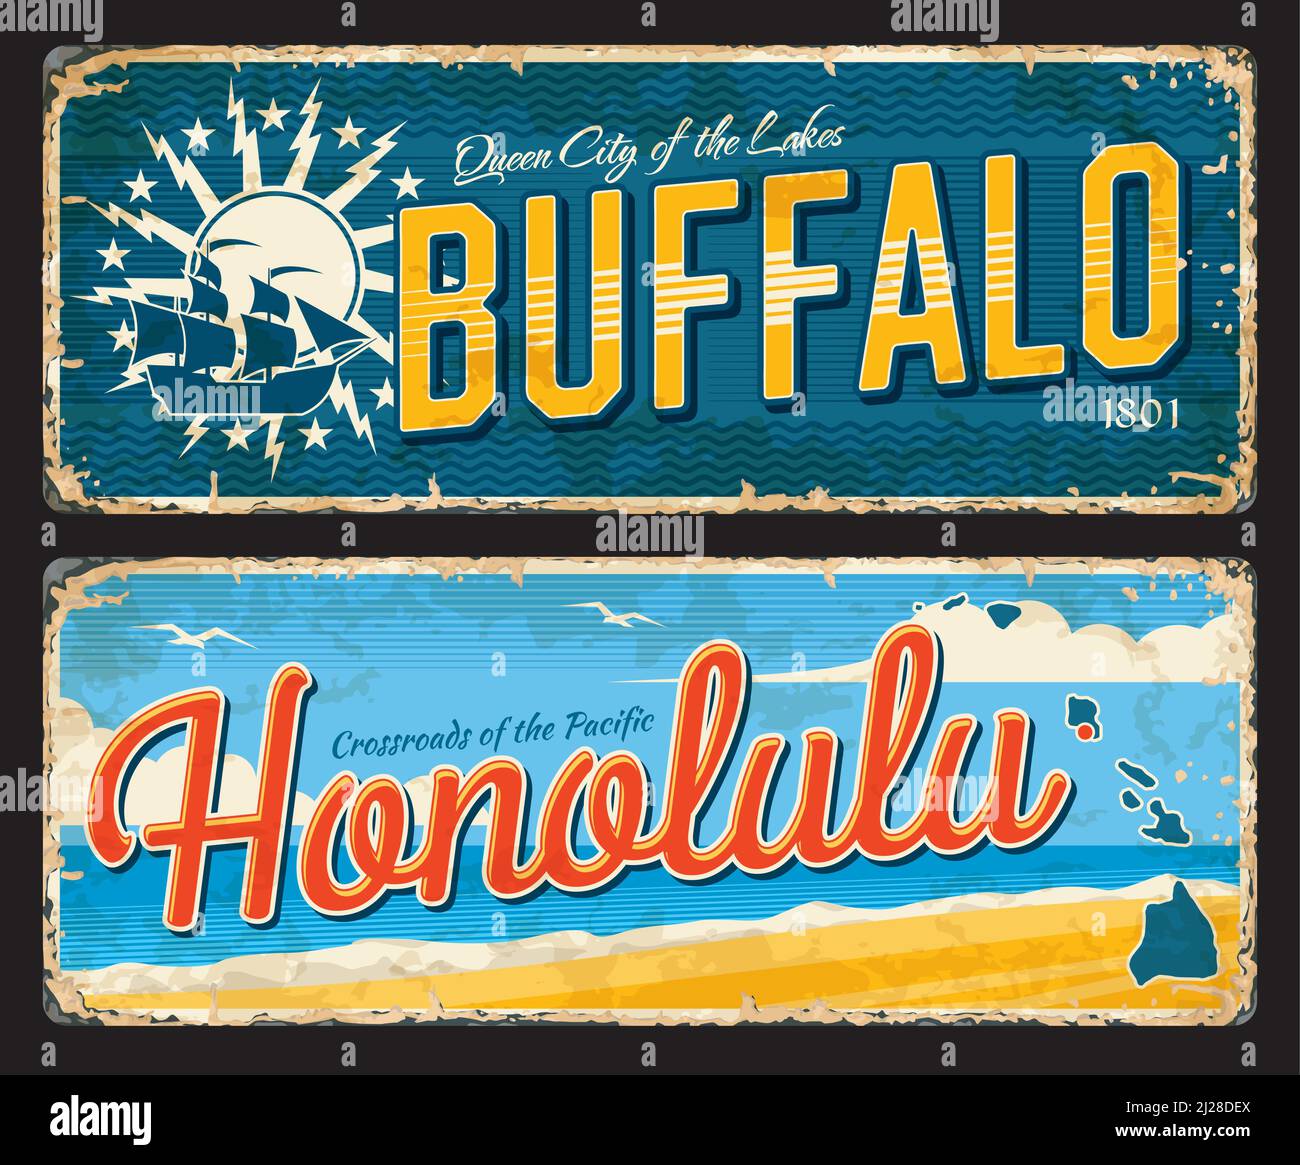 Buffalo, Honolulu american cities plates and travel stickers. American journey tin sign, USA city grungy vector stickers or souvenir postcards. United States city plates with city seal or flag symbol Stock Vector